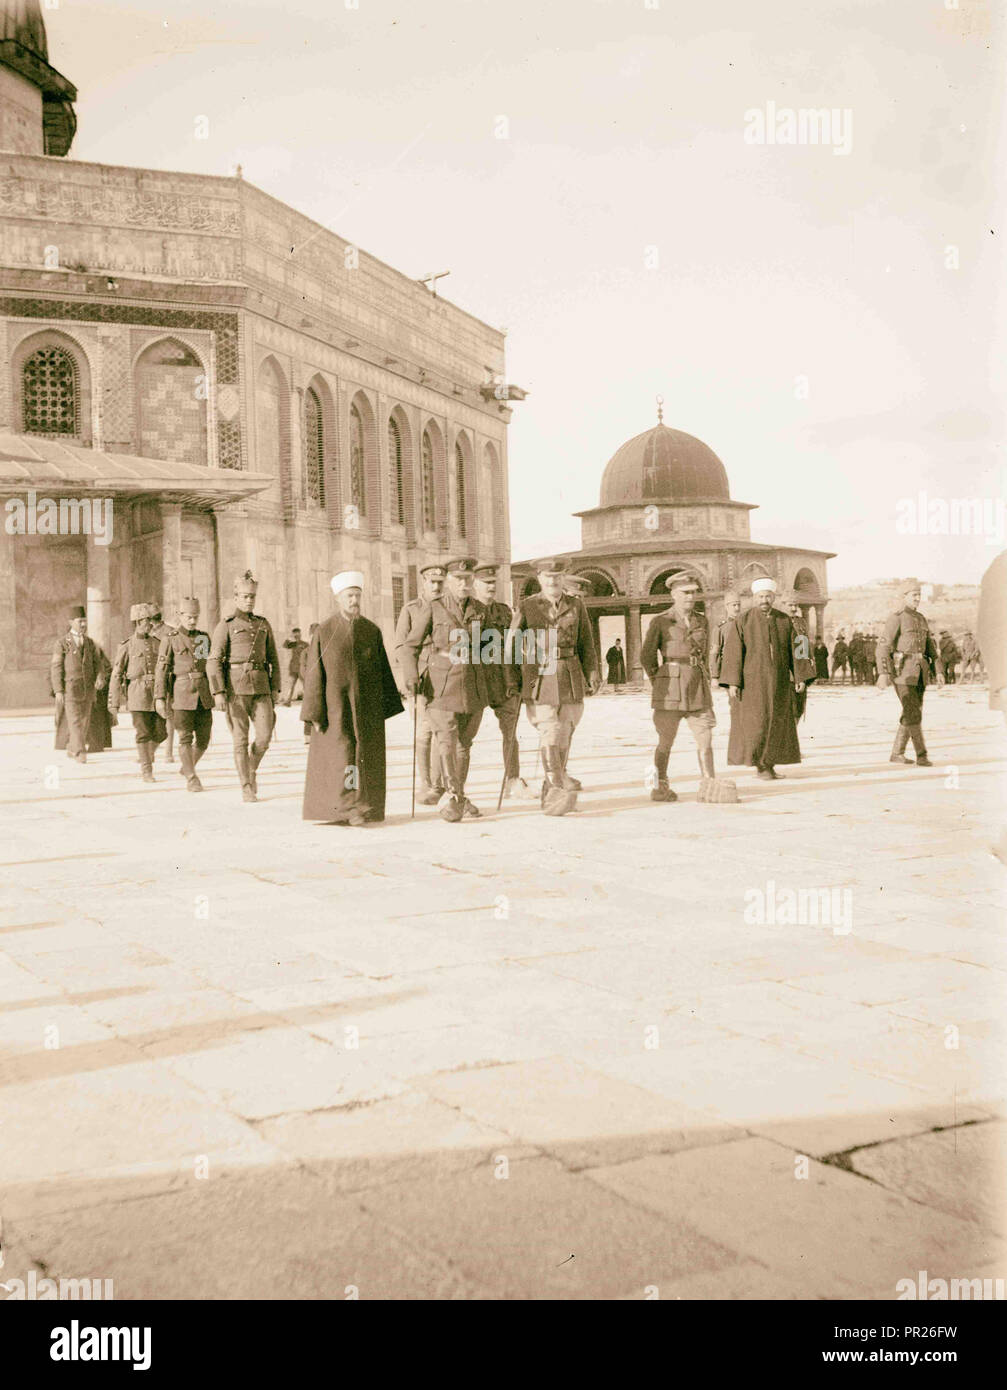 Lord Plumer group outside of Mosque of Omar, Dome of the Rock 1925, Jerusalem, Israel Stock Photo